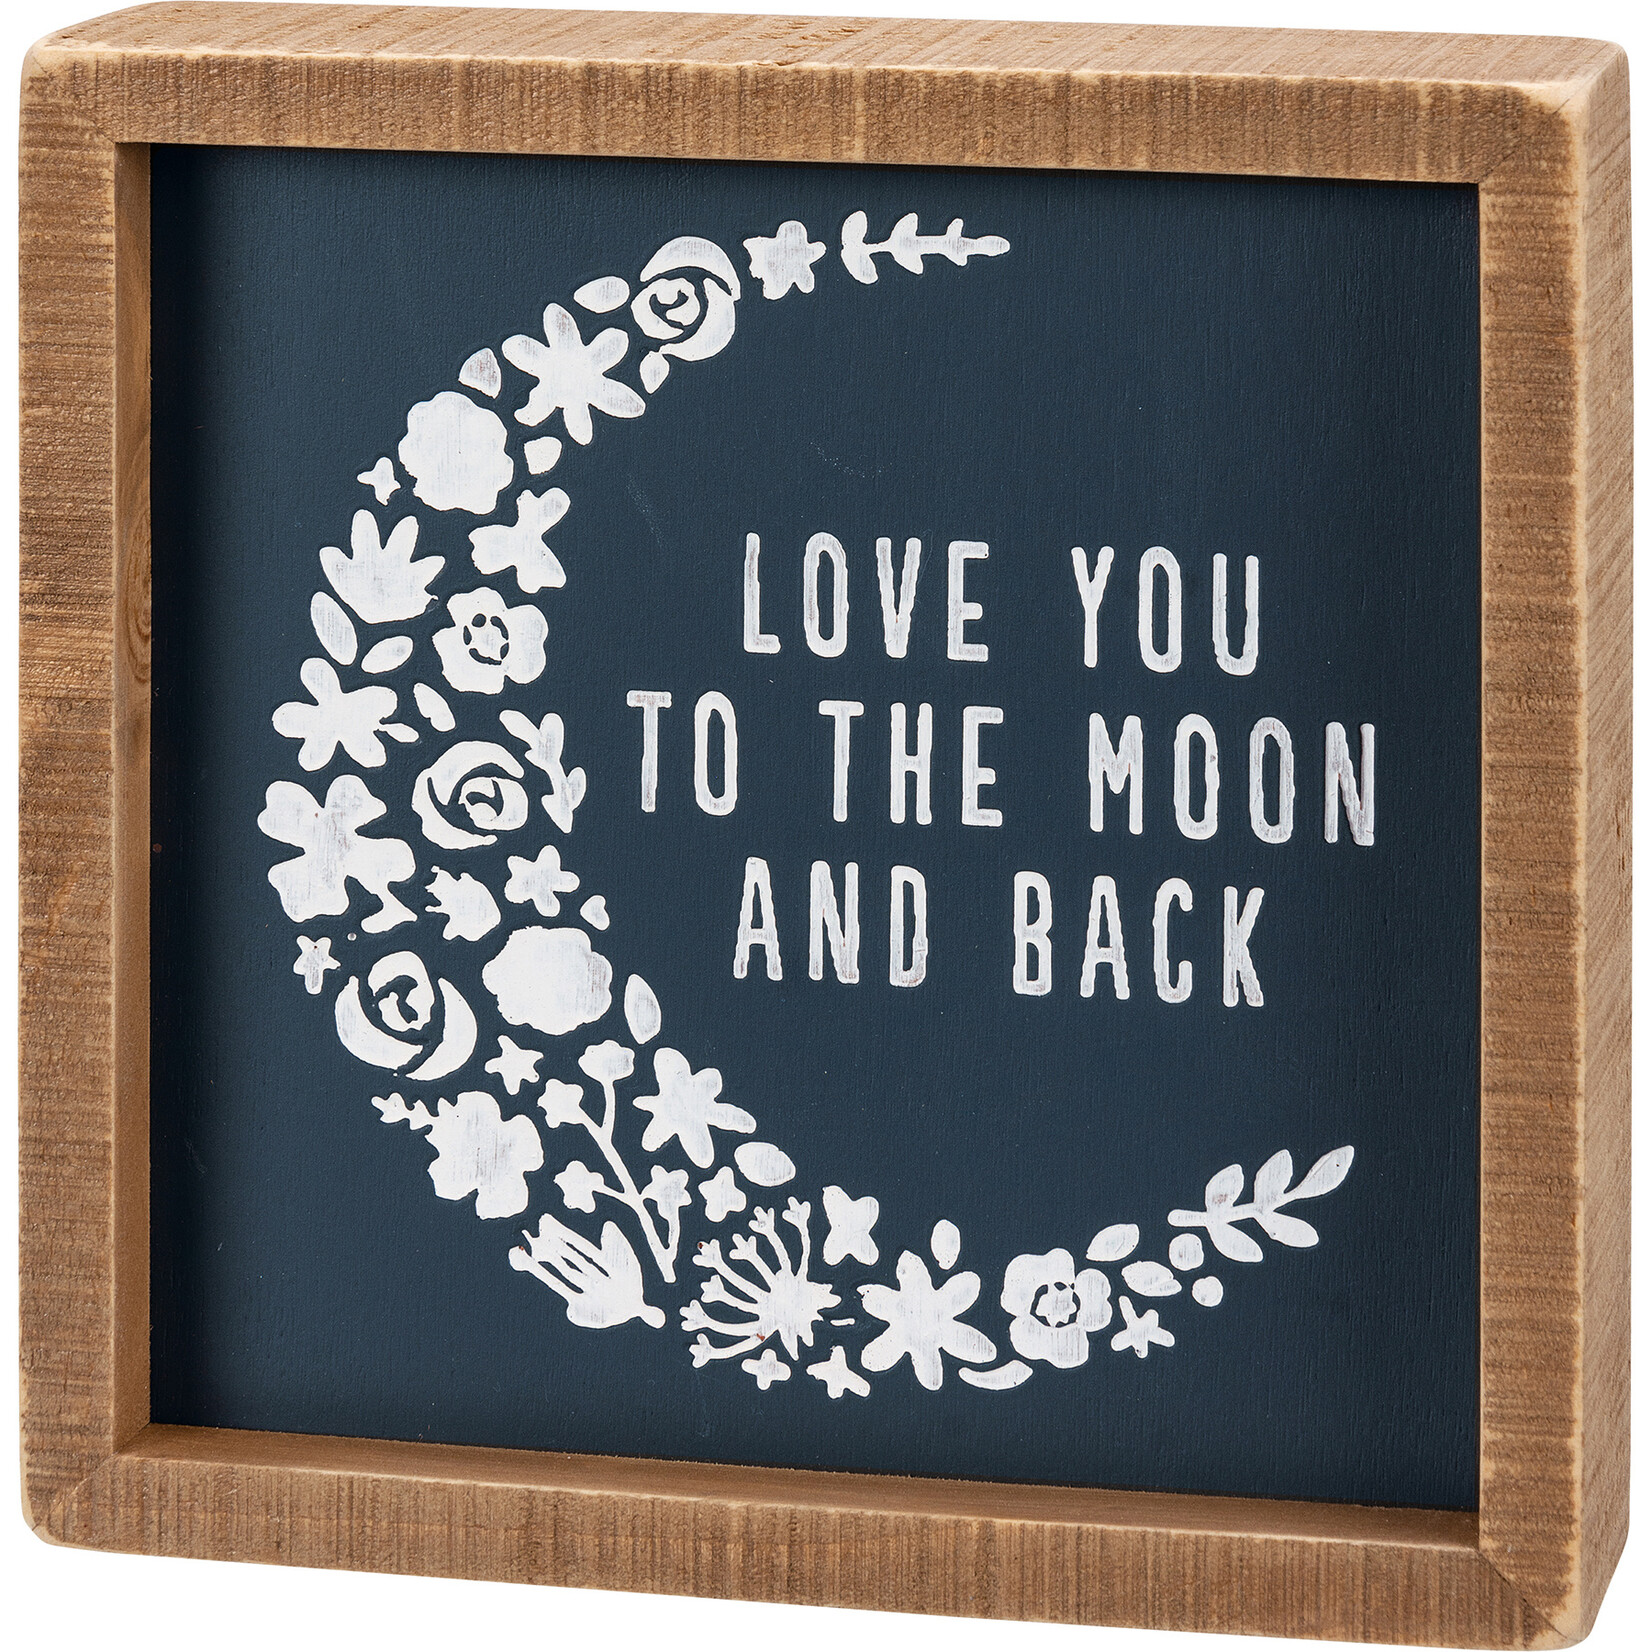 Primitives by Kathy Primitives by Kathy- Moon and Back Floral Inset Sign